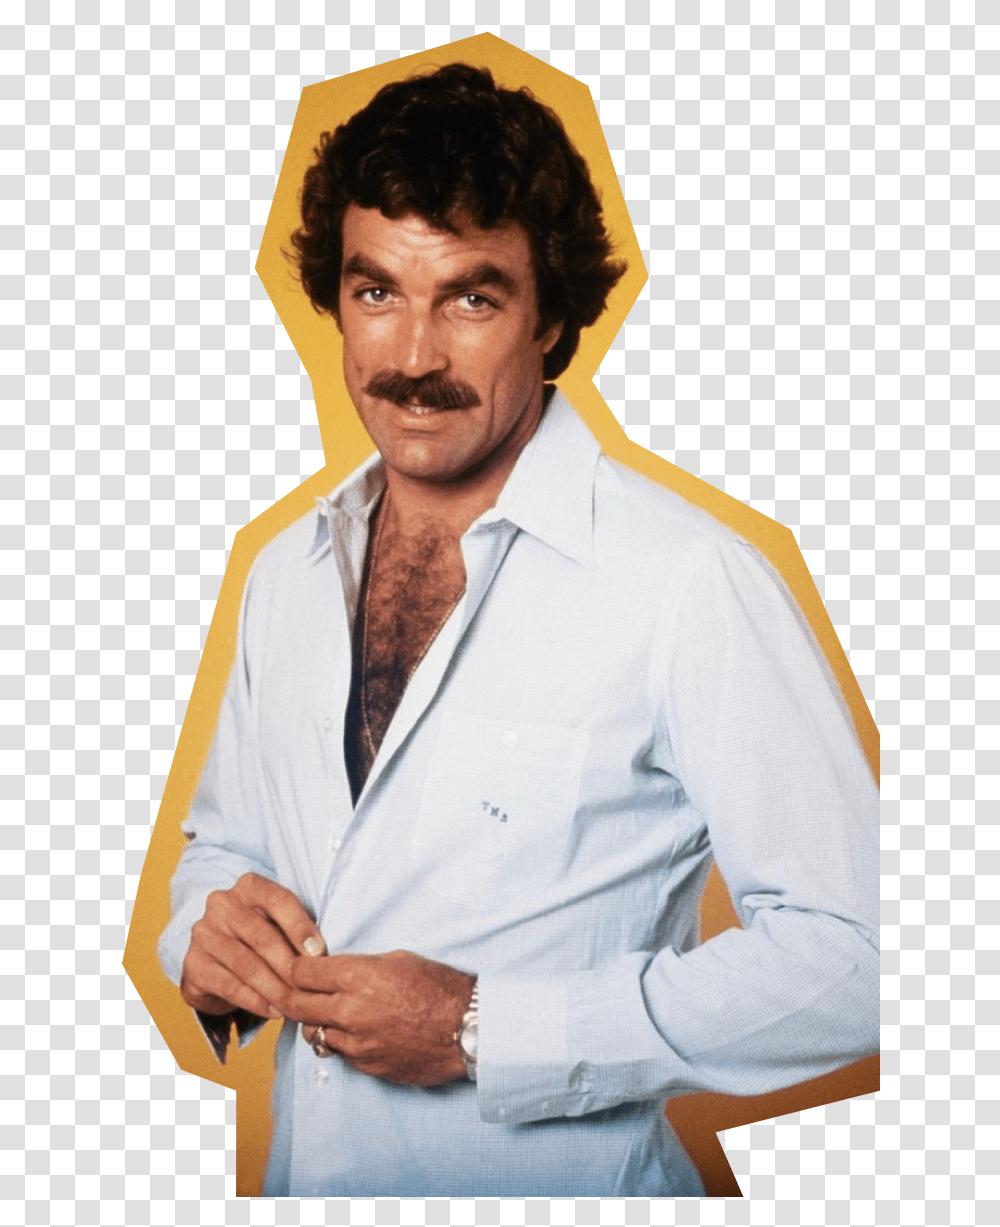 Taco Meat Chest Hair Burt Reynolds Vs Tom Selleck, Clothing, Person, Shirt, Tie Transparent Png